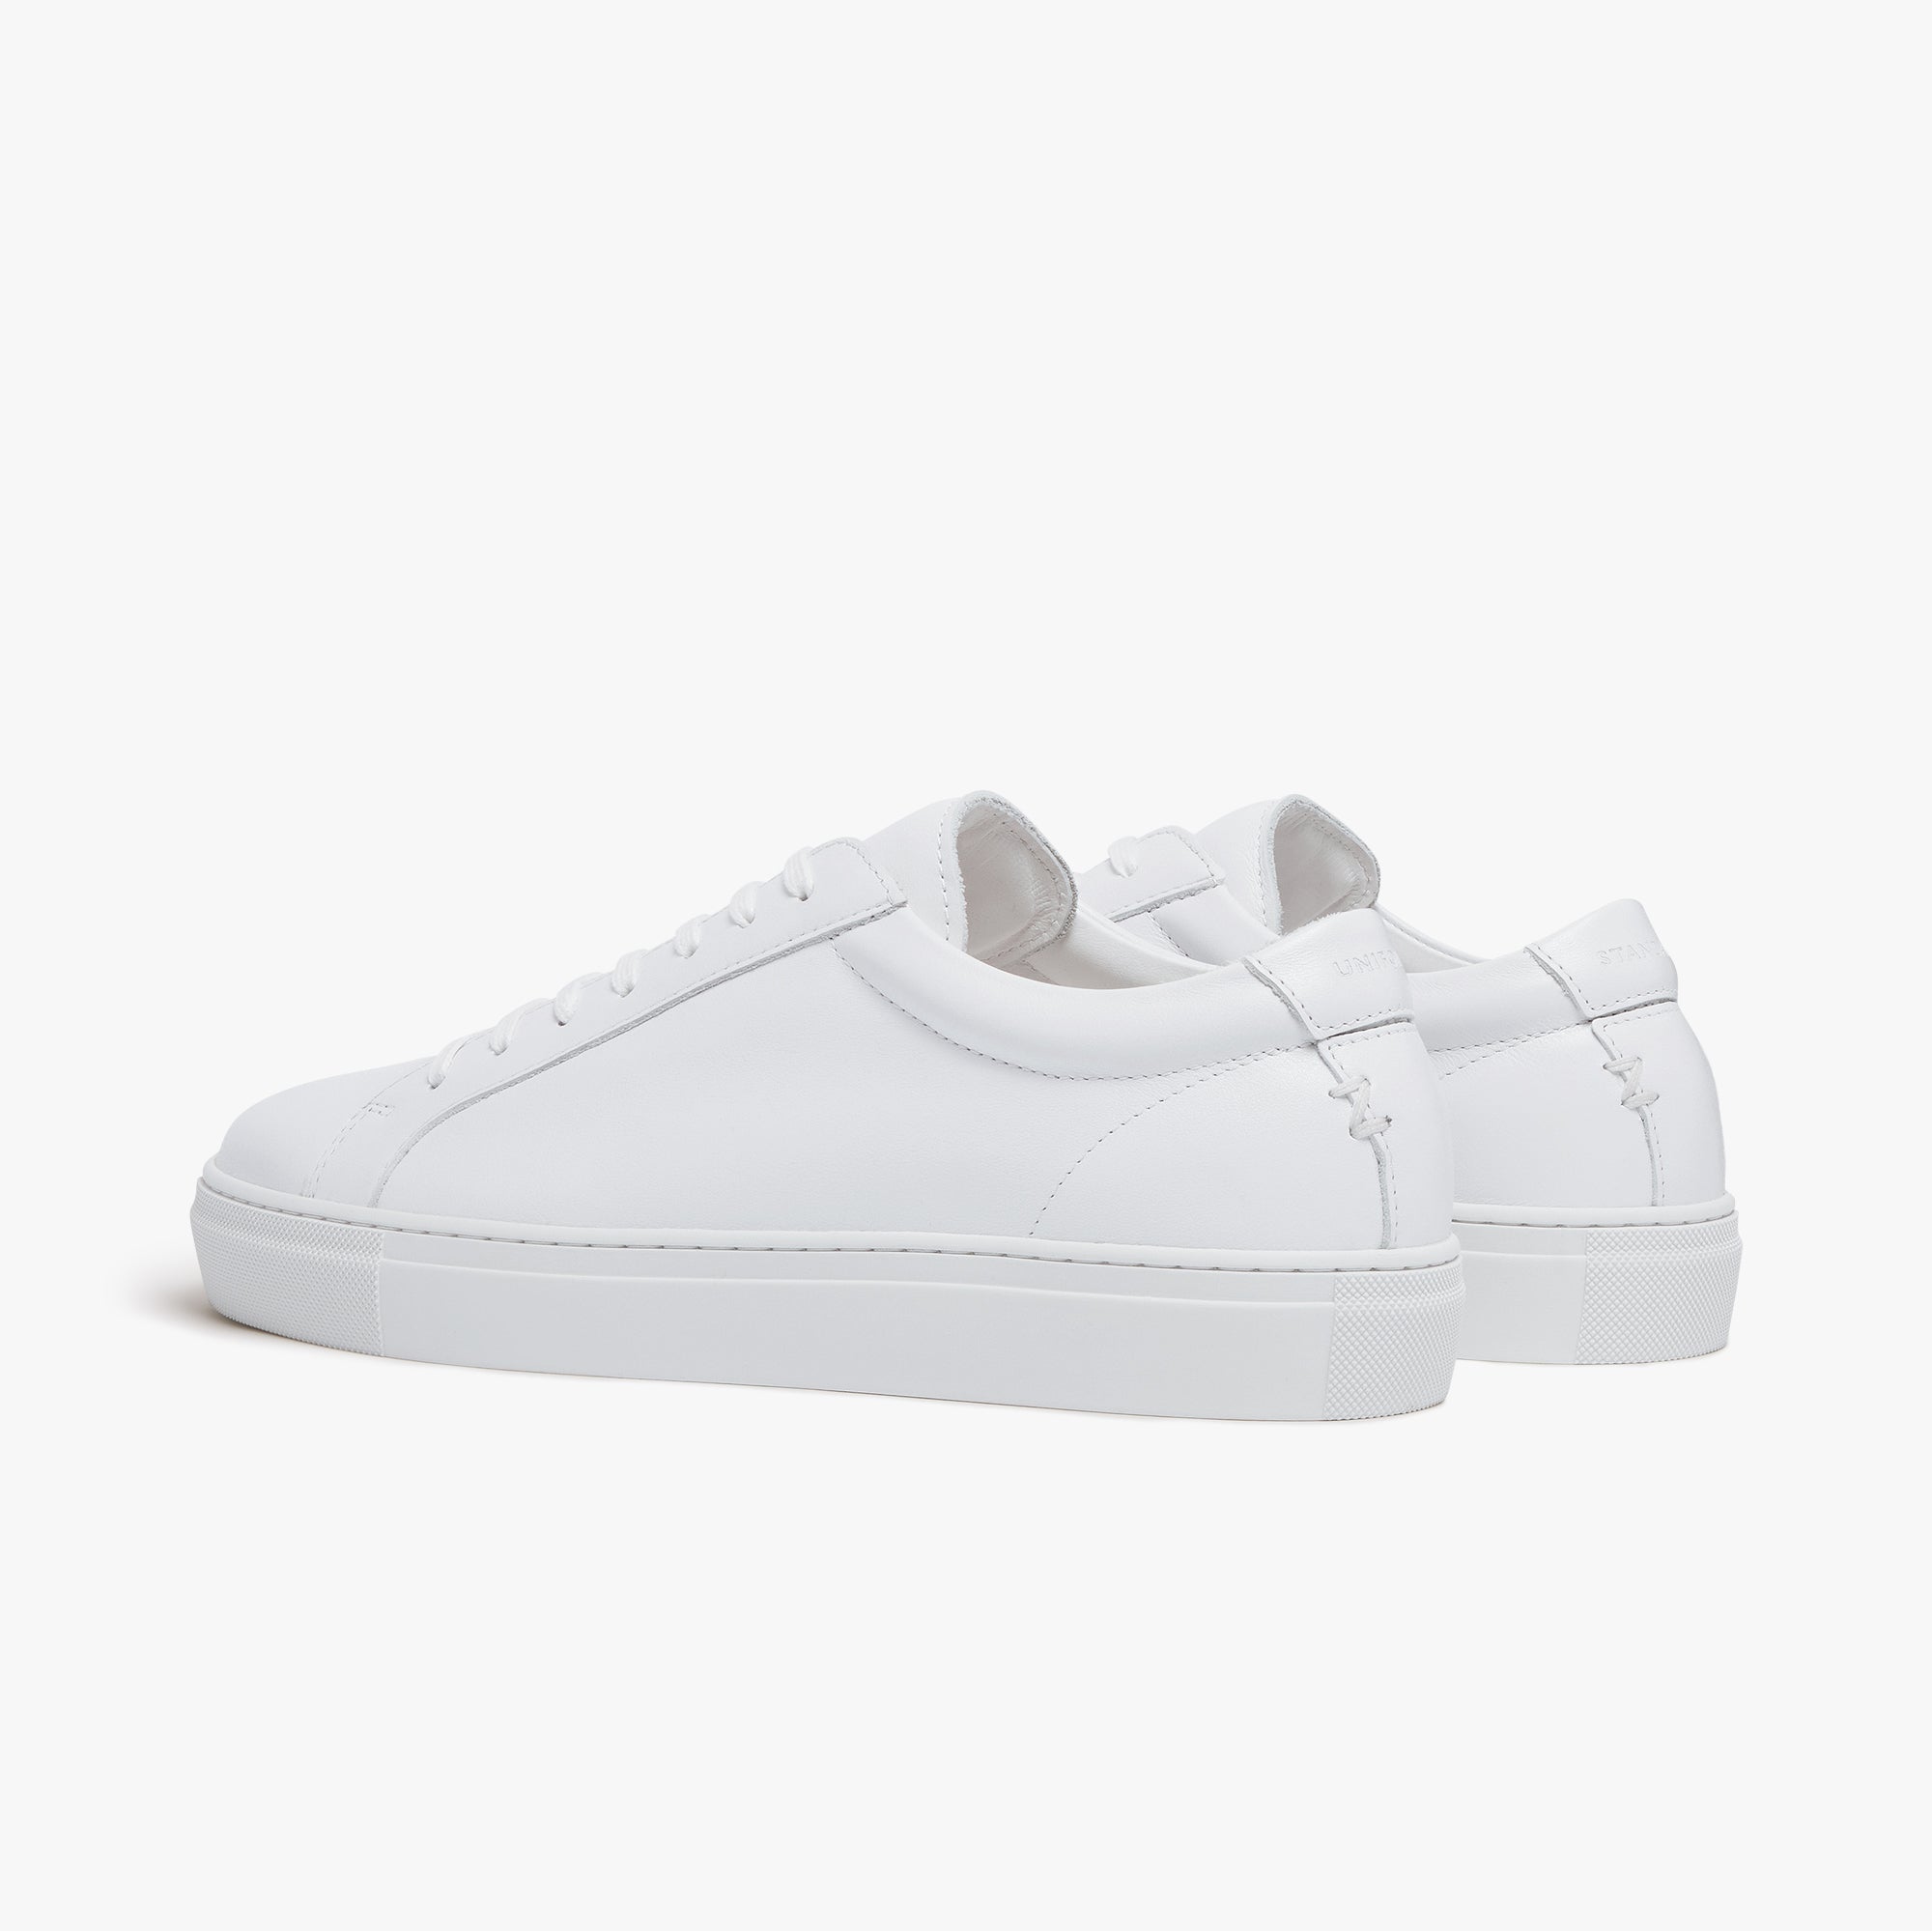 Series 1 Triple White Leather Womens